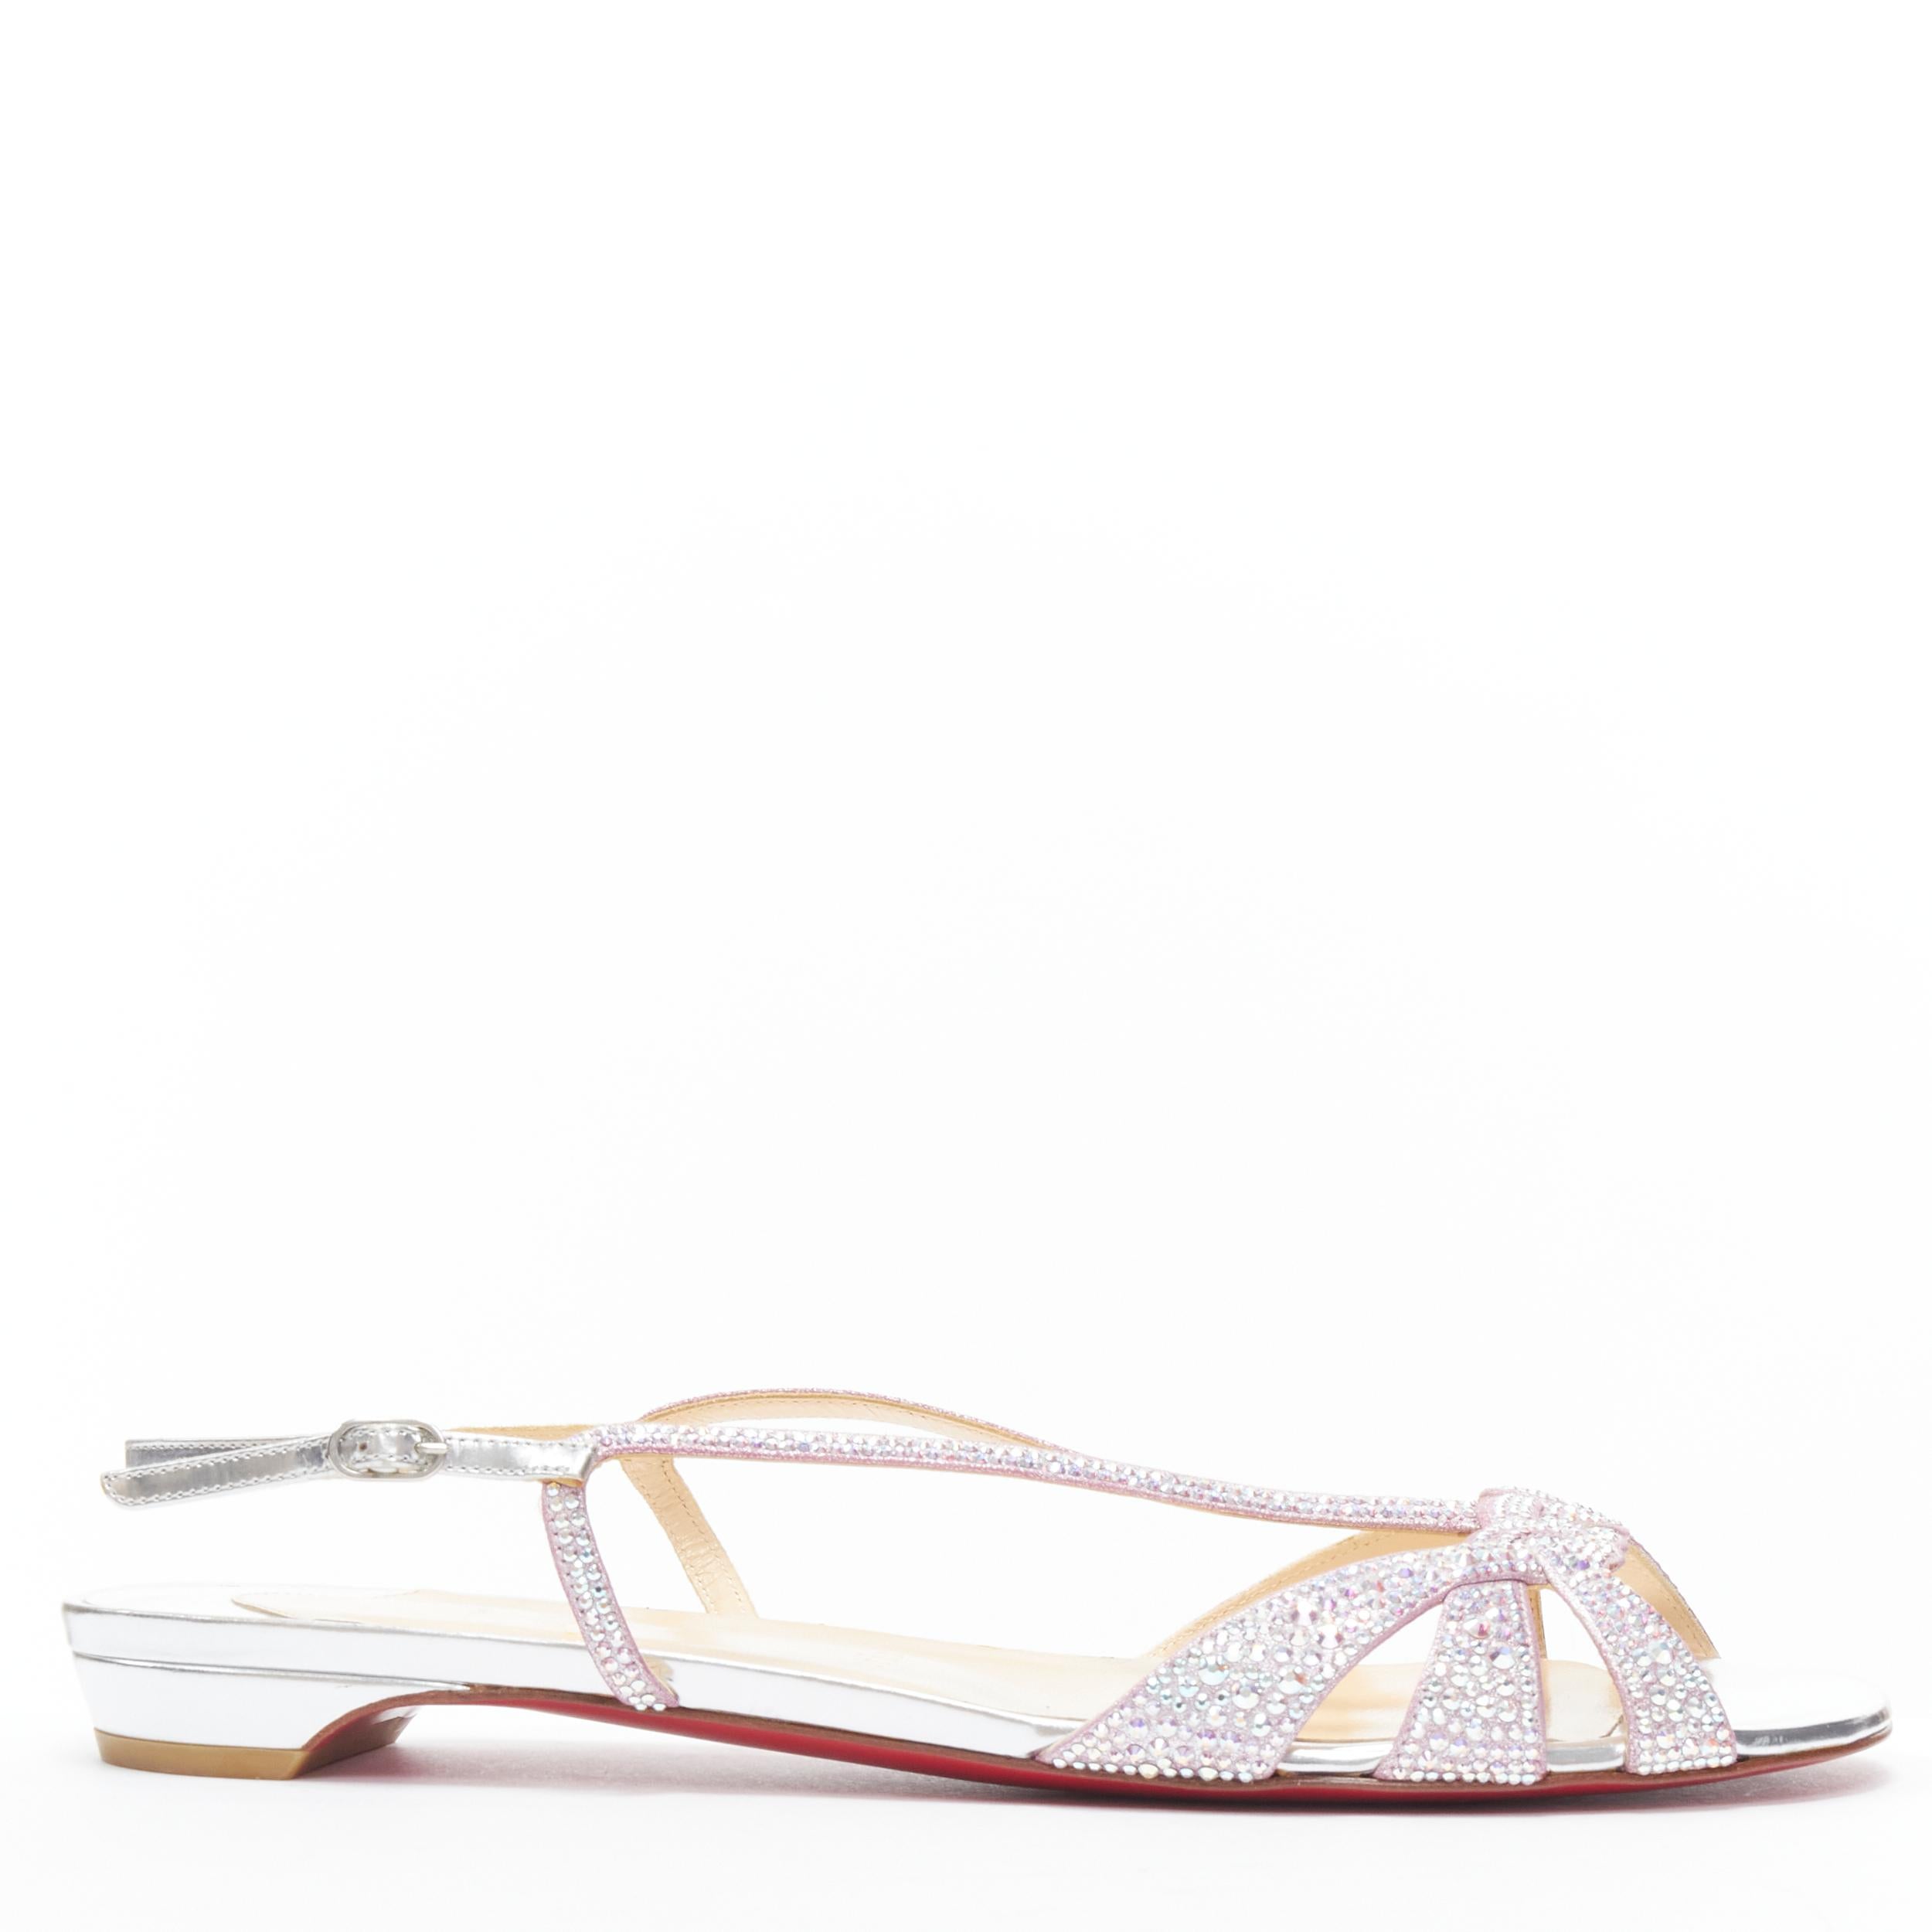 new CHRISTIAB LOUBOUTIN Lady Strass crystal embellished flat sandals EU39 
Reference: TGAS/B01512 
Brand: Christian Louboutin 
Designer: Christian Louboutin 
Model: Lady Strass sandals 
Material: Leather 
Color: Silver 
Pattern: Solid 
Closure: